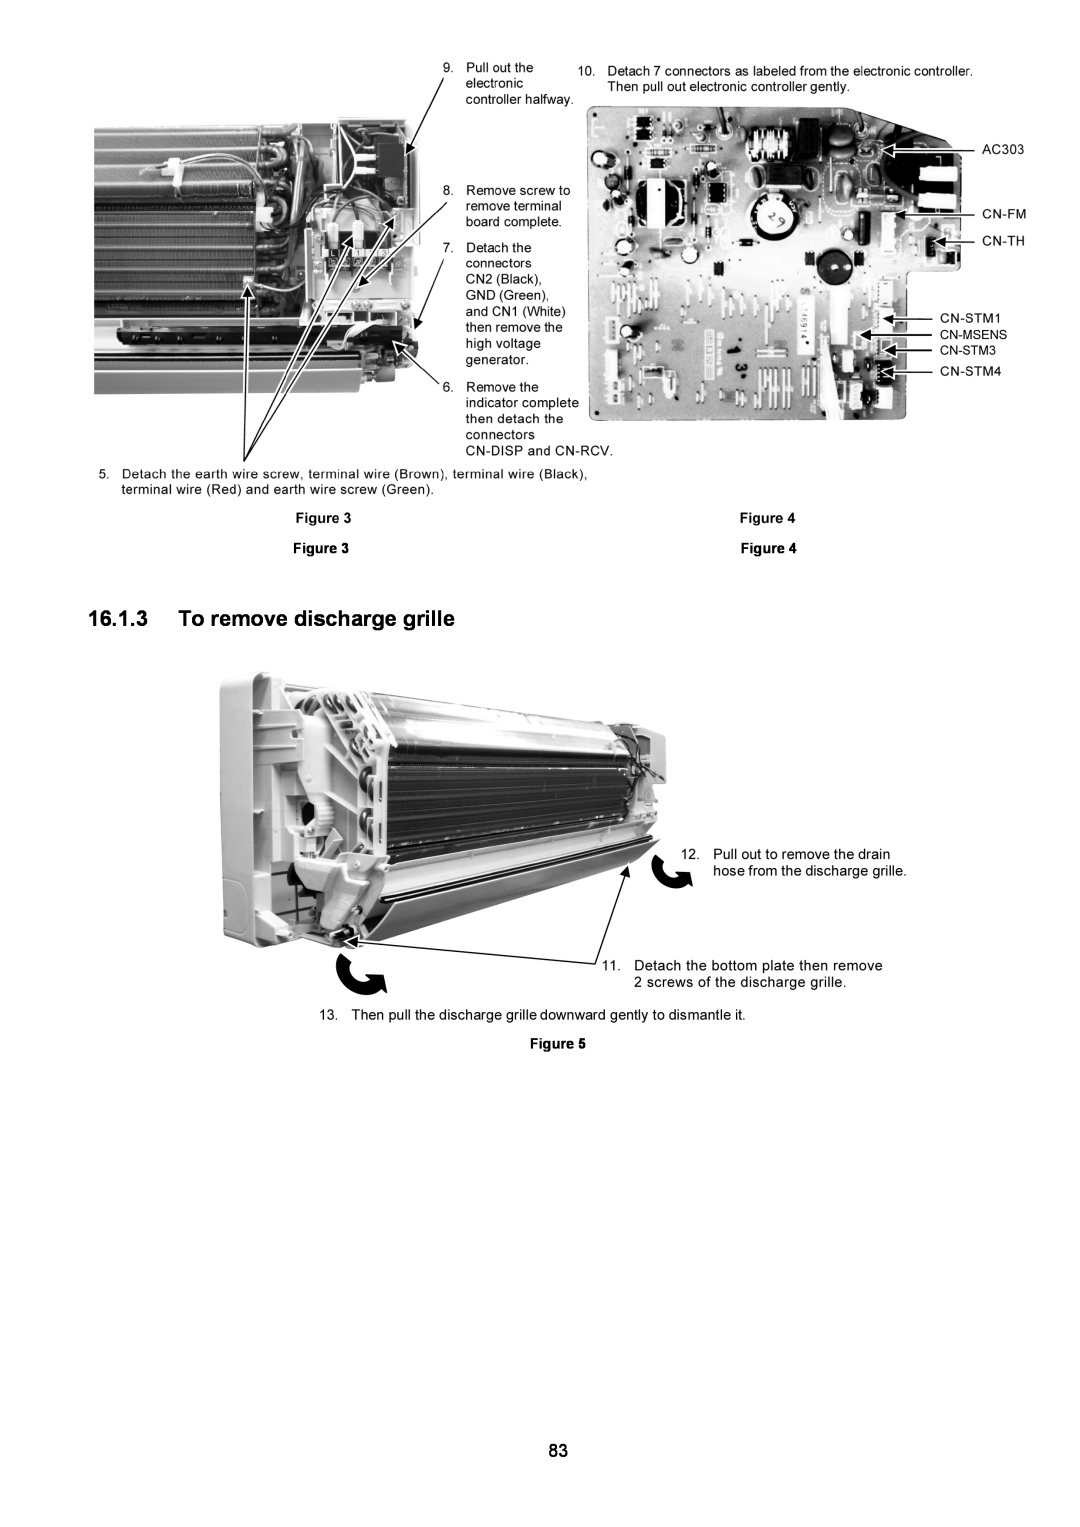 Panasonic CU-XE12PKUA, CS-XE12PKUA, CS-XE9PKUA, CU-XE9PKUA manual 16.1.3To remove discharge grille, Figure 